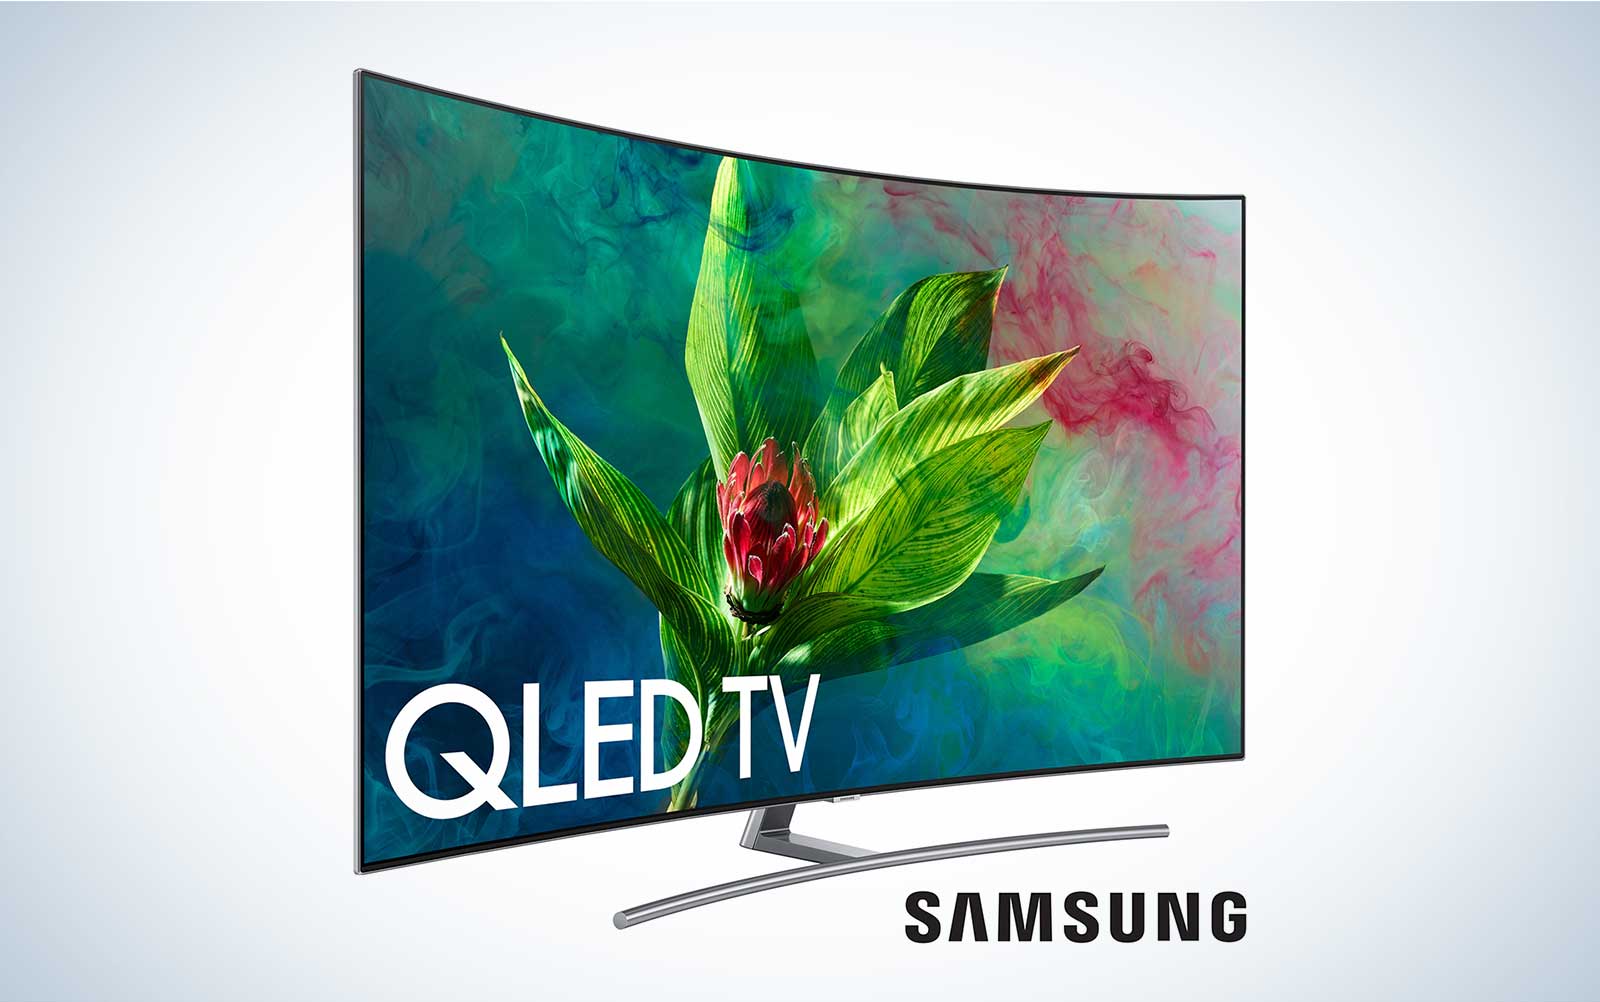 Samsung Q7C curved TV on a plain background